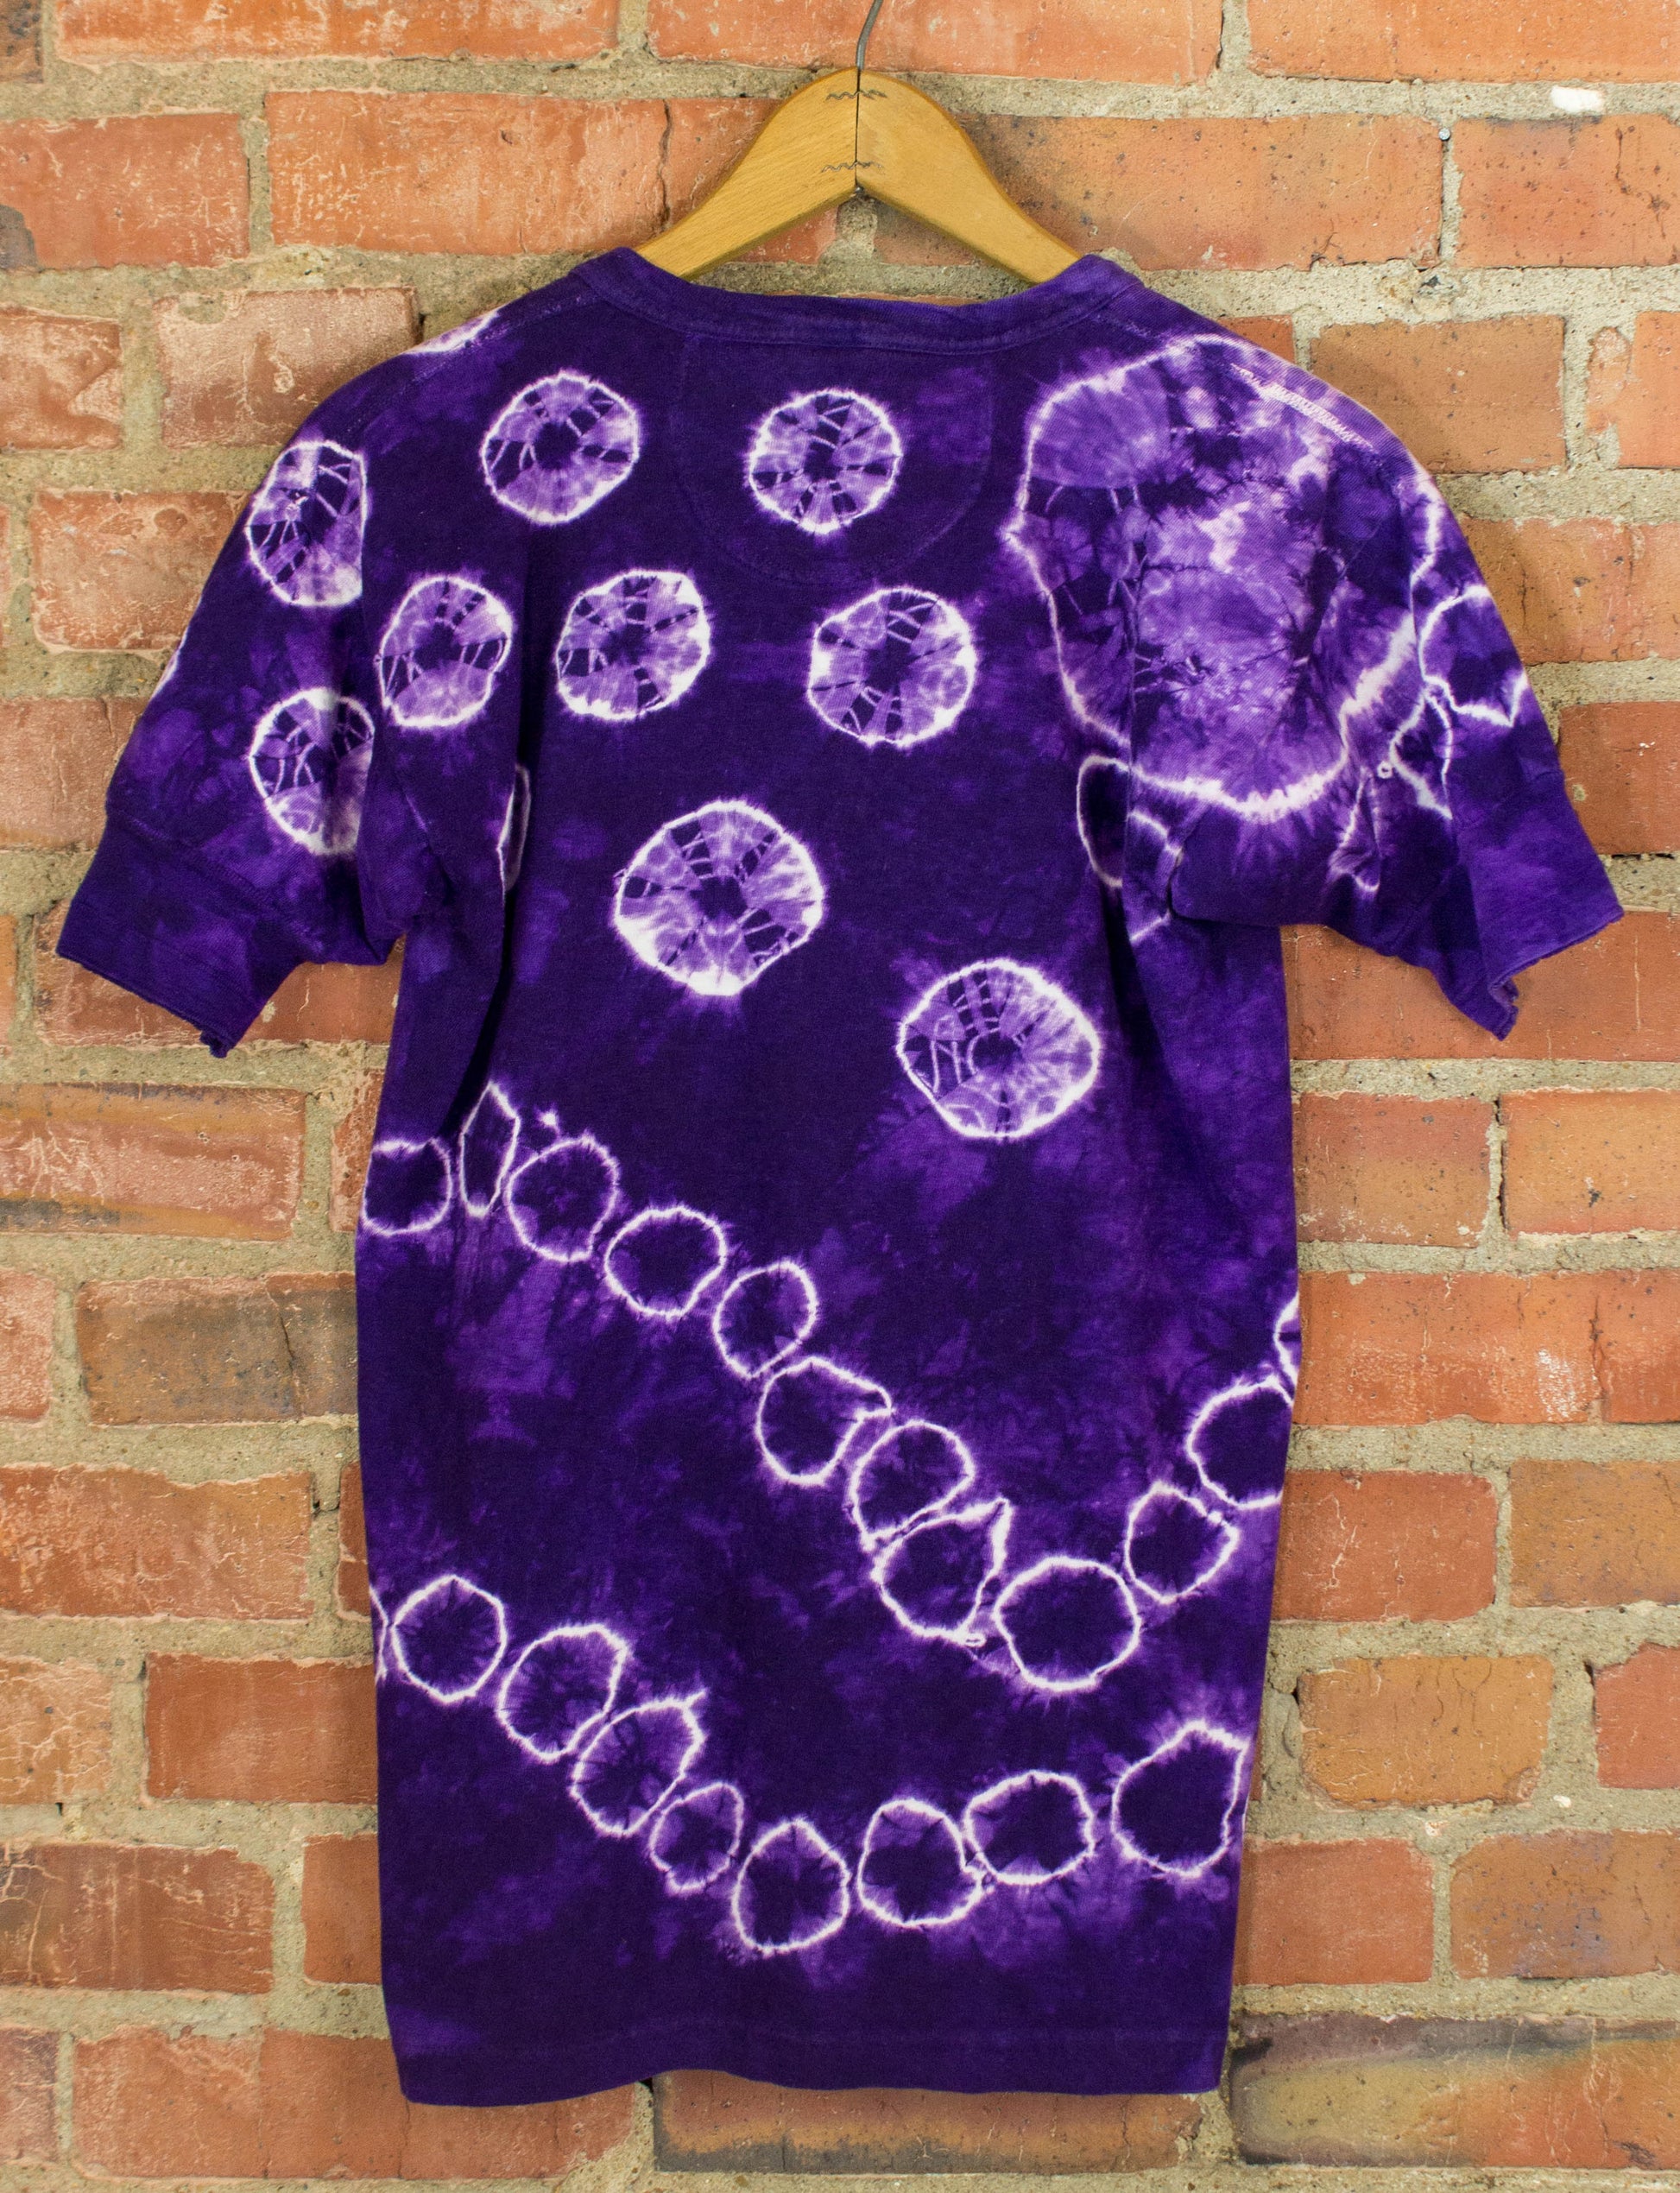 Vintage Mihitabel Tie Dye Henley 60s Purple and White With Circle Designs Small